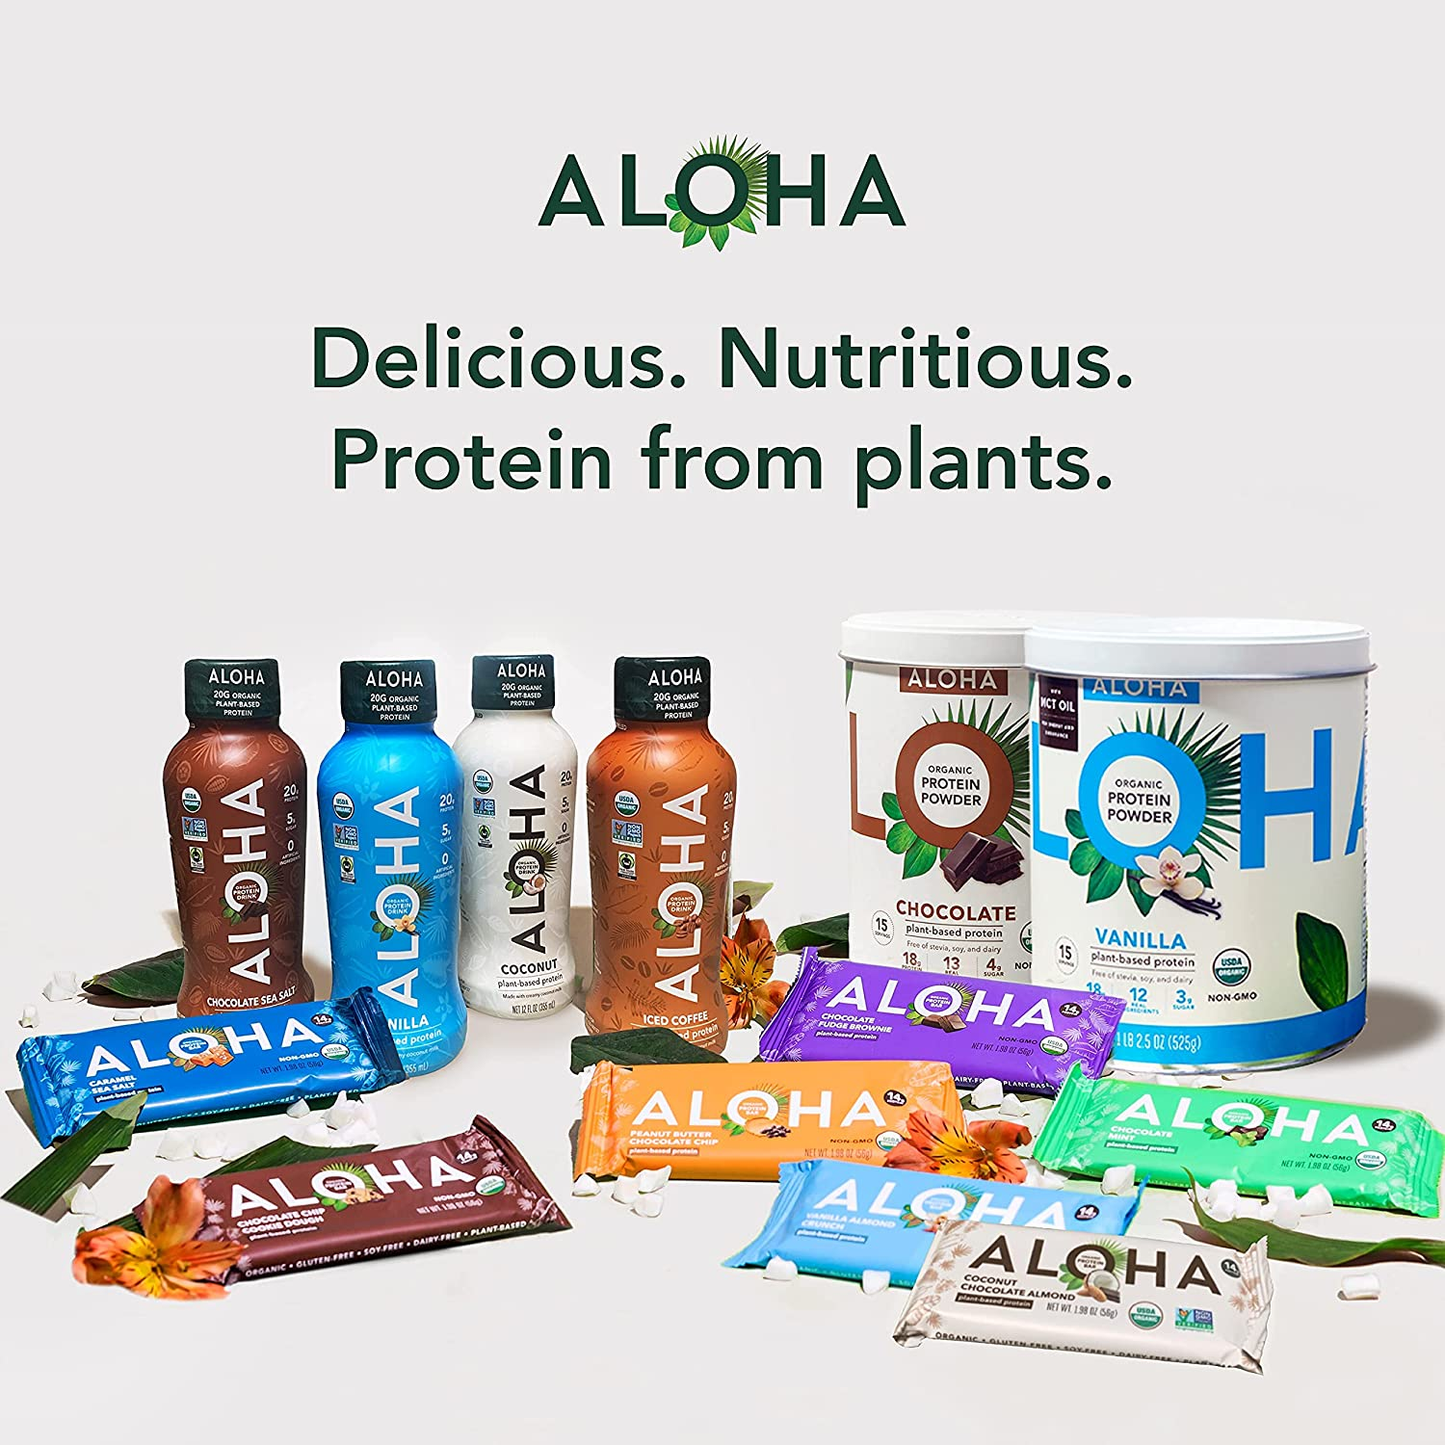 ALOHA Organic Plant Based Ready to Drink Protein Shake W/Mct Oil Variety Pack (4Ct, 12Oz Bottle) 20G Protein, Meal Replacement, Low Sugar & Carb, Gluten-Free, Paleo, Non-Gmo, No Soy, Stevia or Sugar Alcohol…